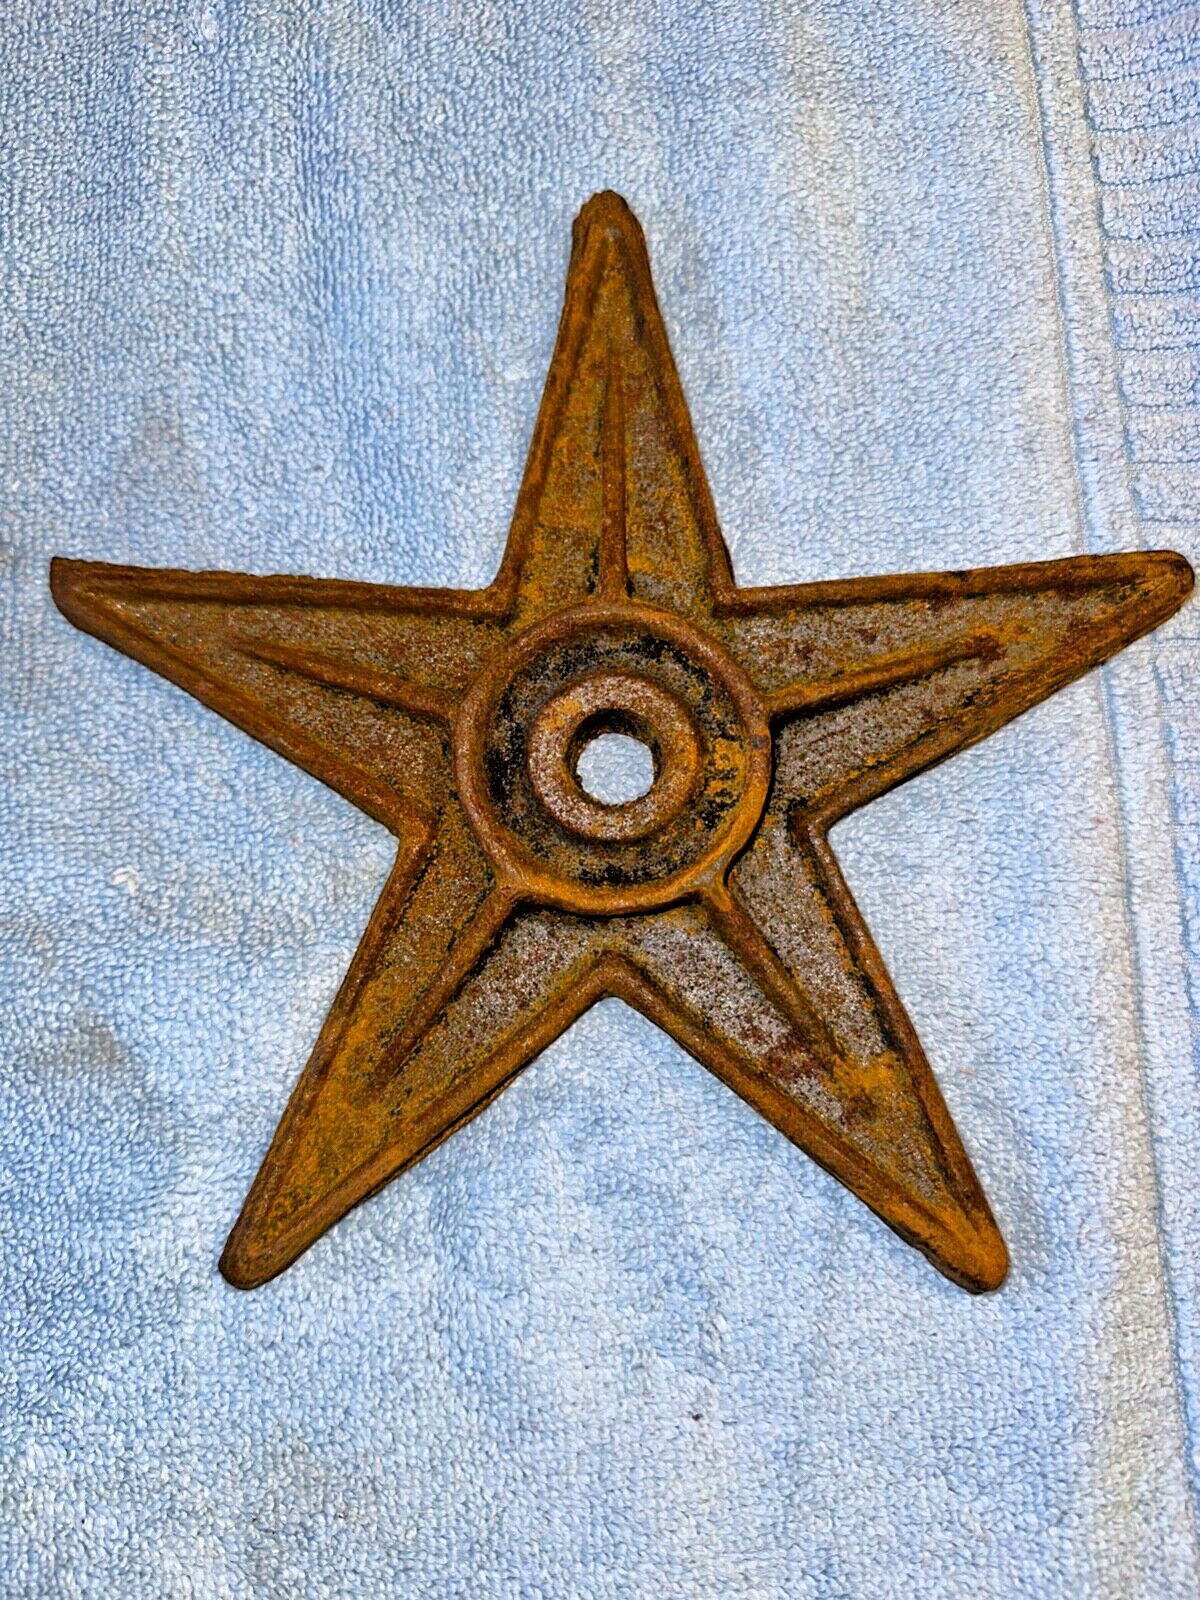 Vintage Cast Iron Star Country Barn Metal Rustic 5 Point Heavy Metal Repurposed